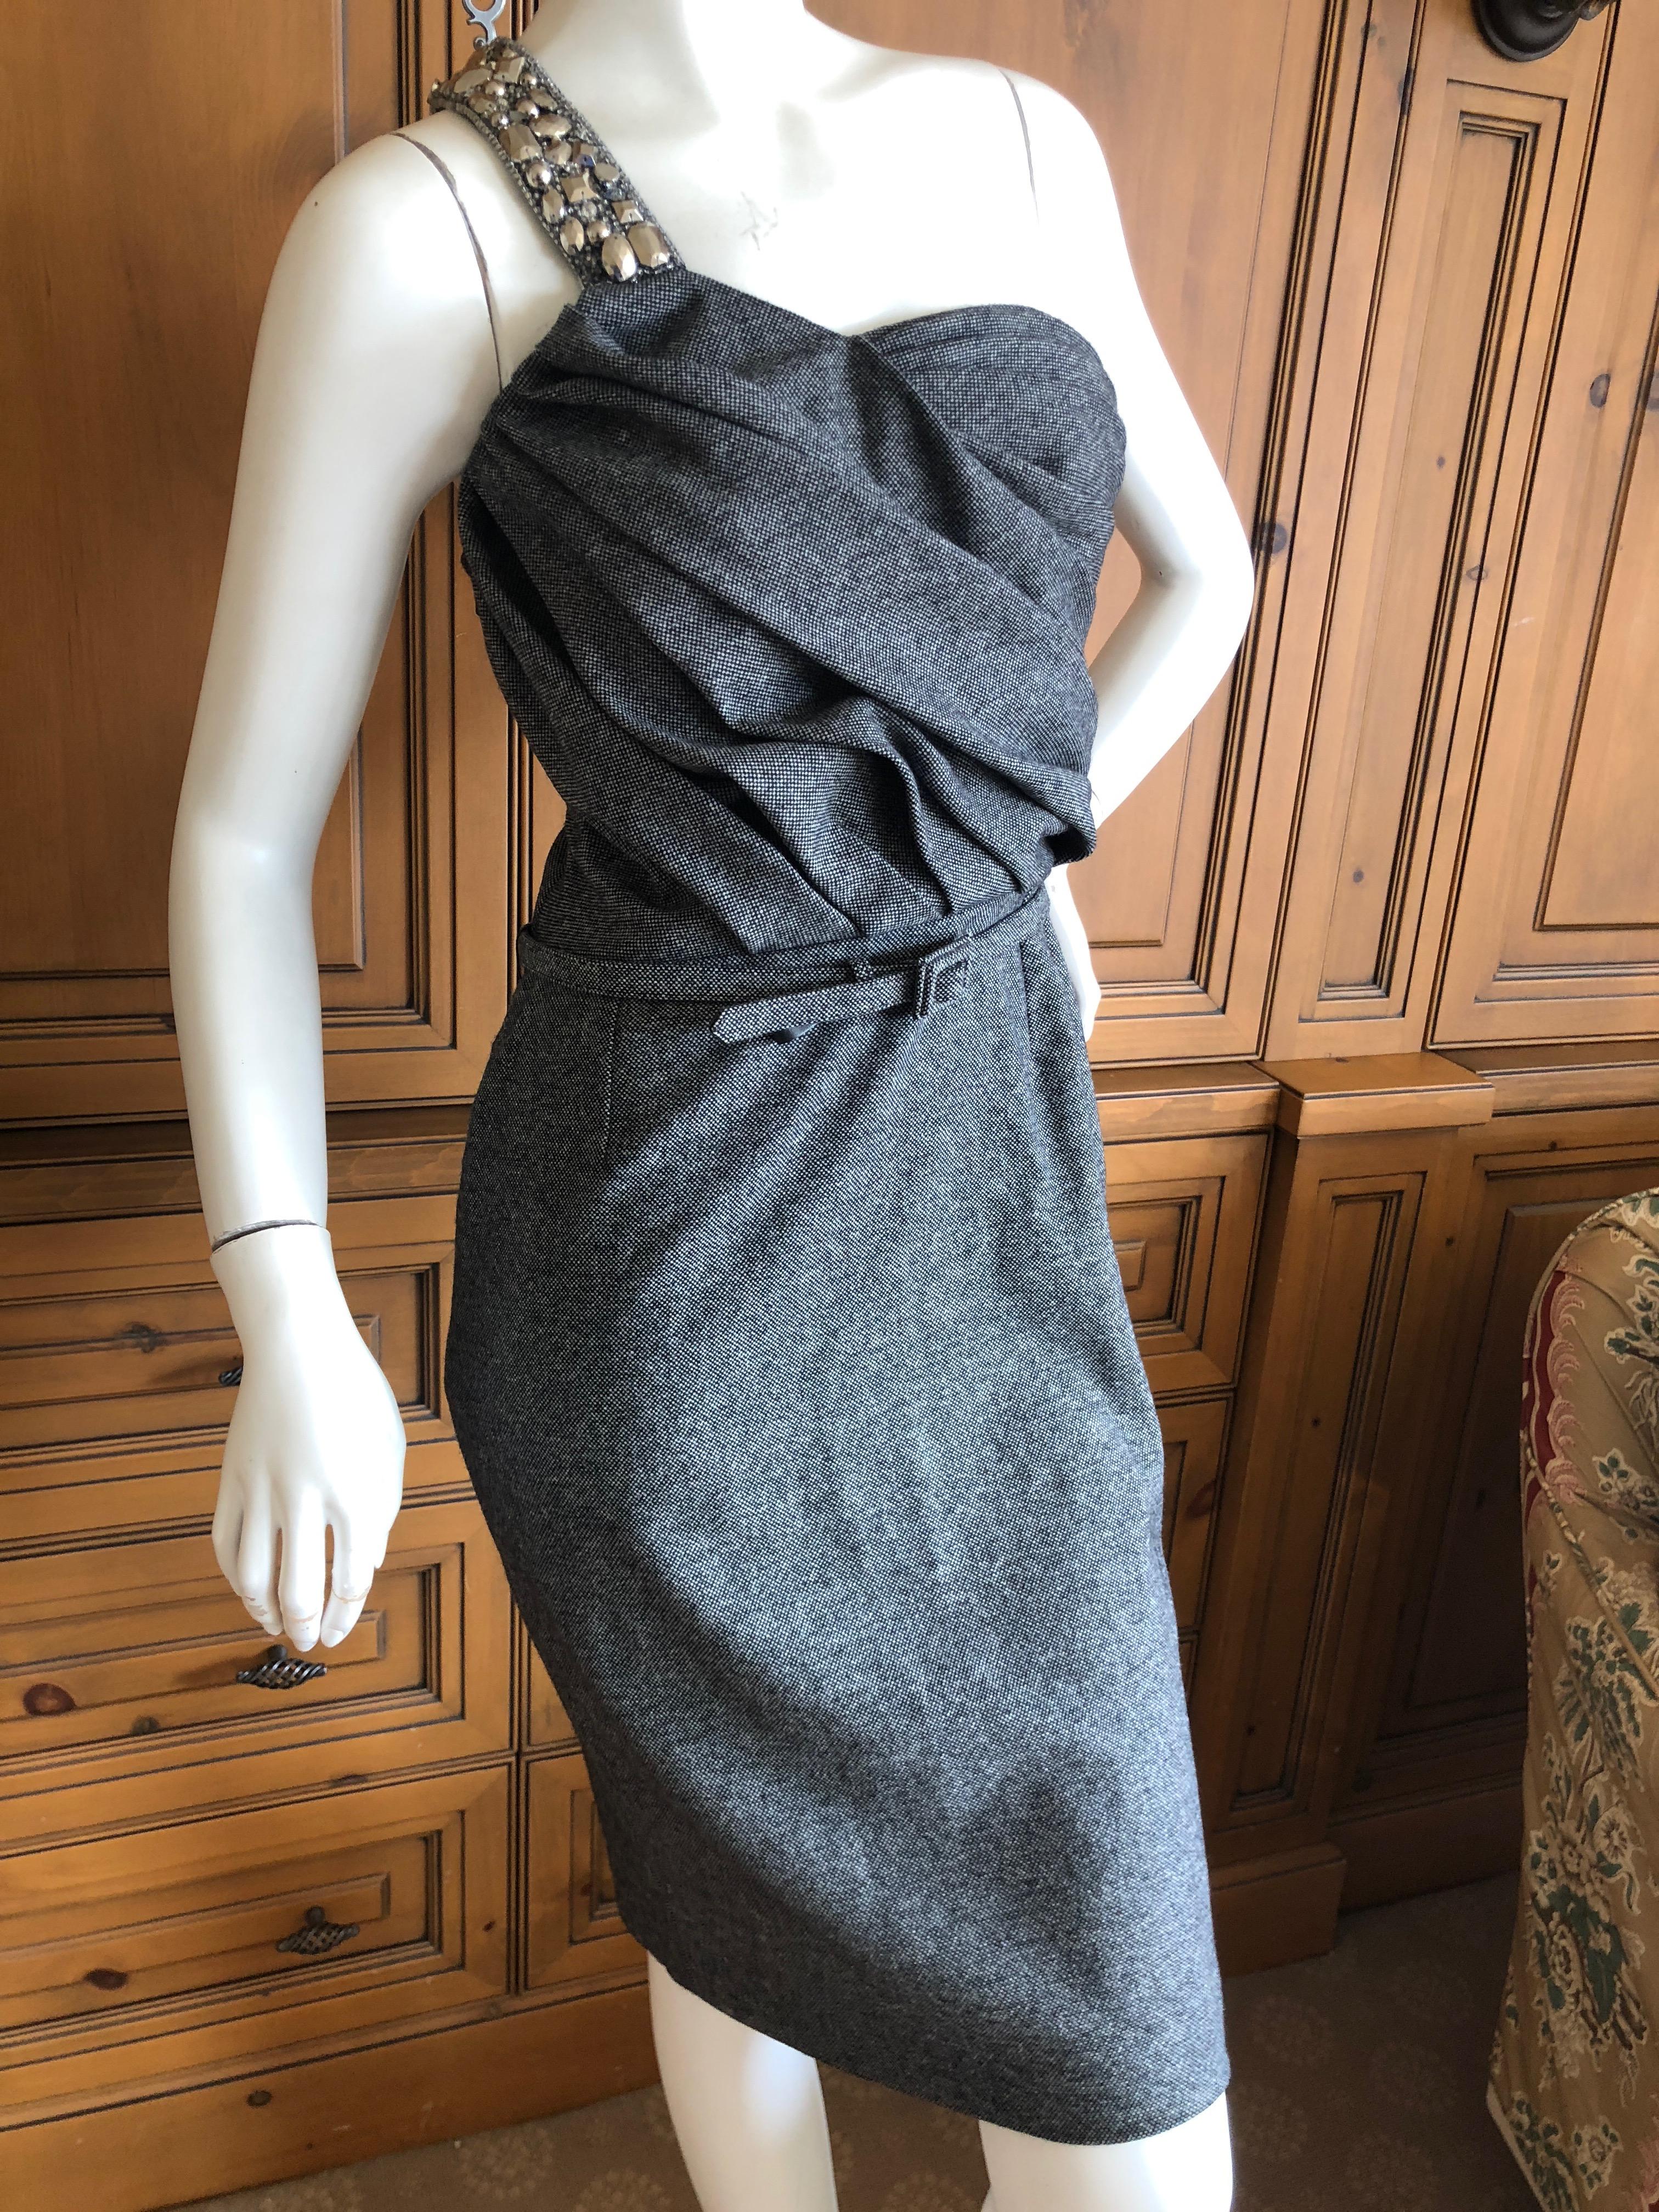 Christian Dior John Galliano Gray Tweed Cocktail Dress with Jewel Shoulder Strap For Sale 3